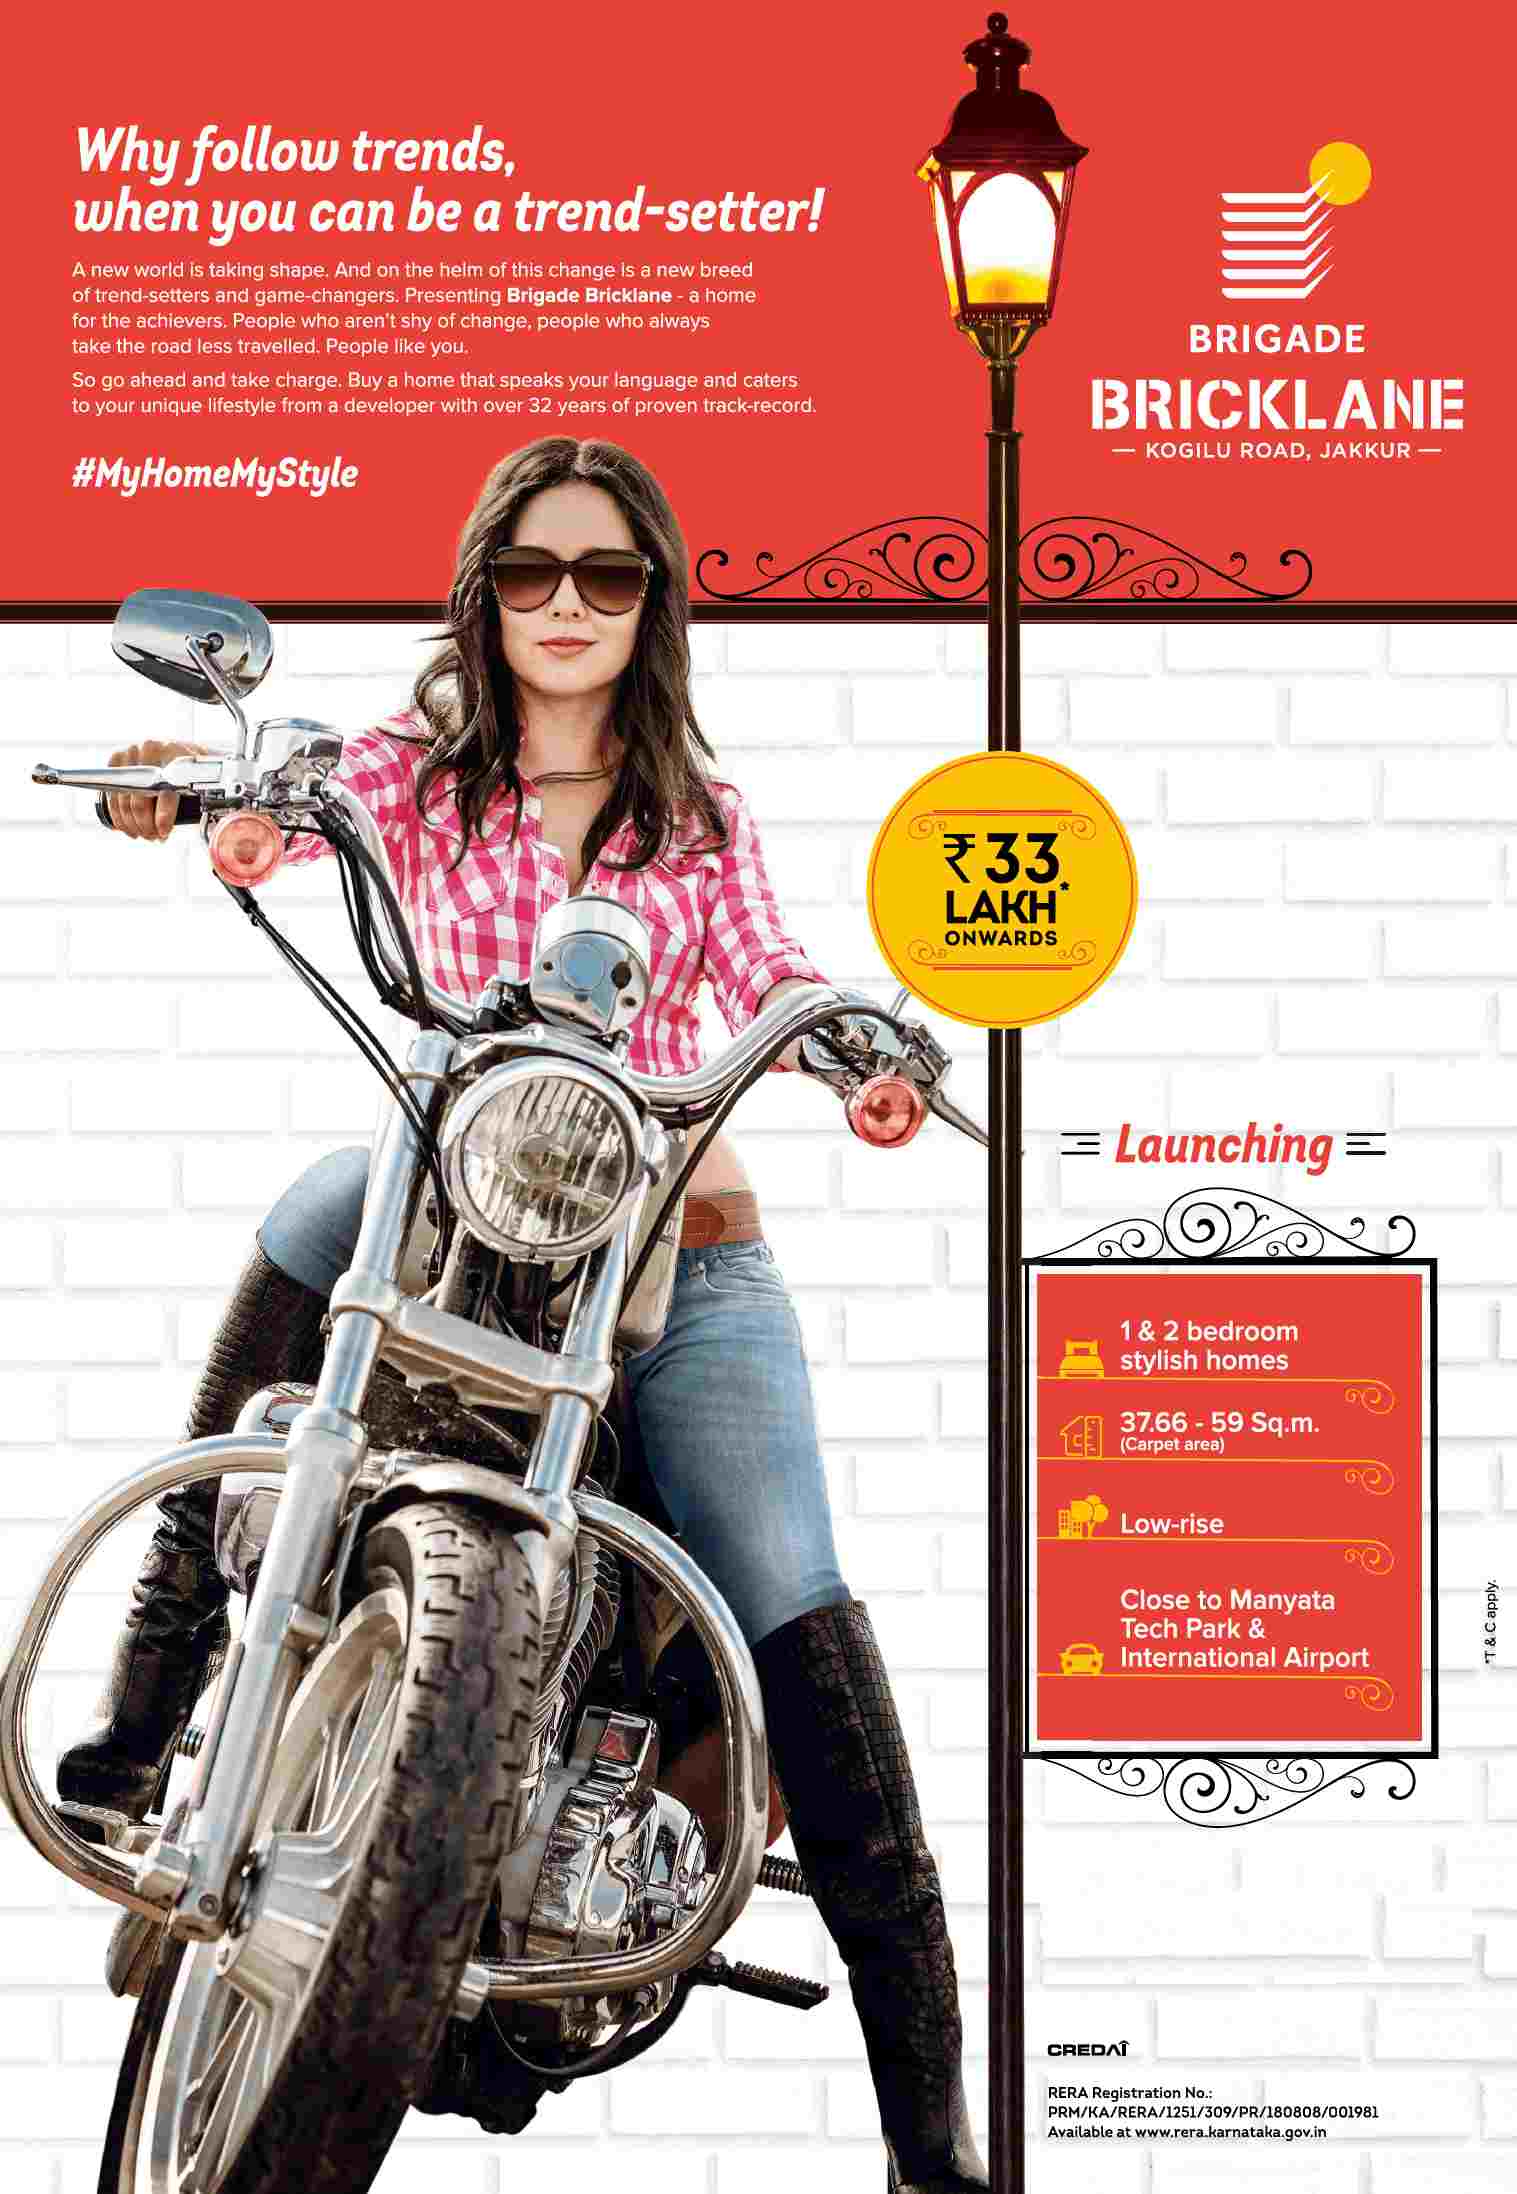 Avail the benefits of PMAY scheme & save up to 22.67 lakhs at Brigade Bricklane in Bangalore